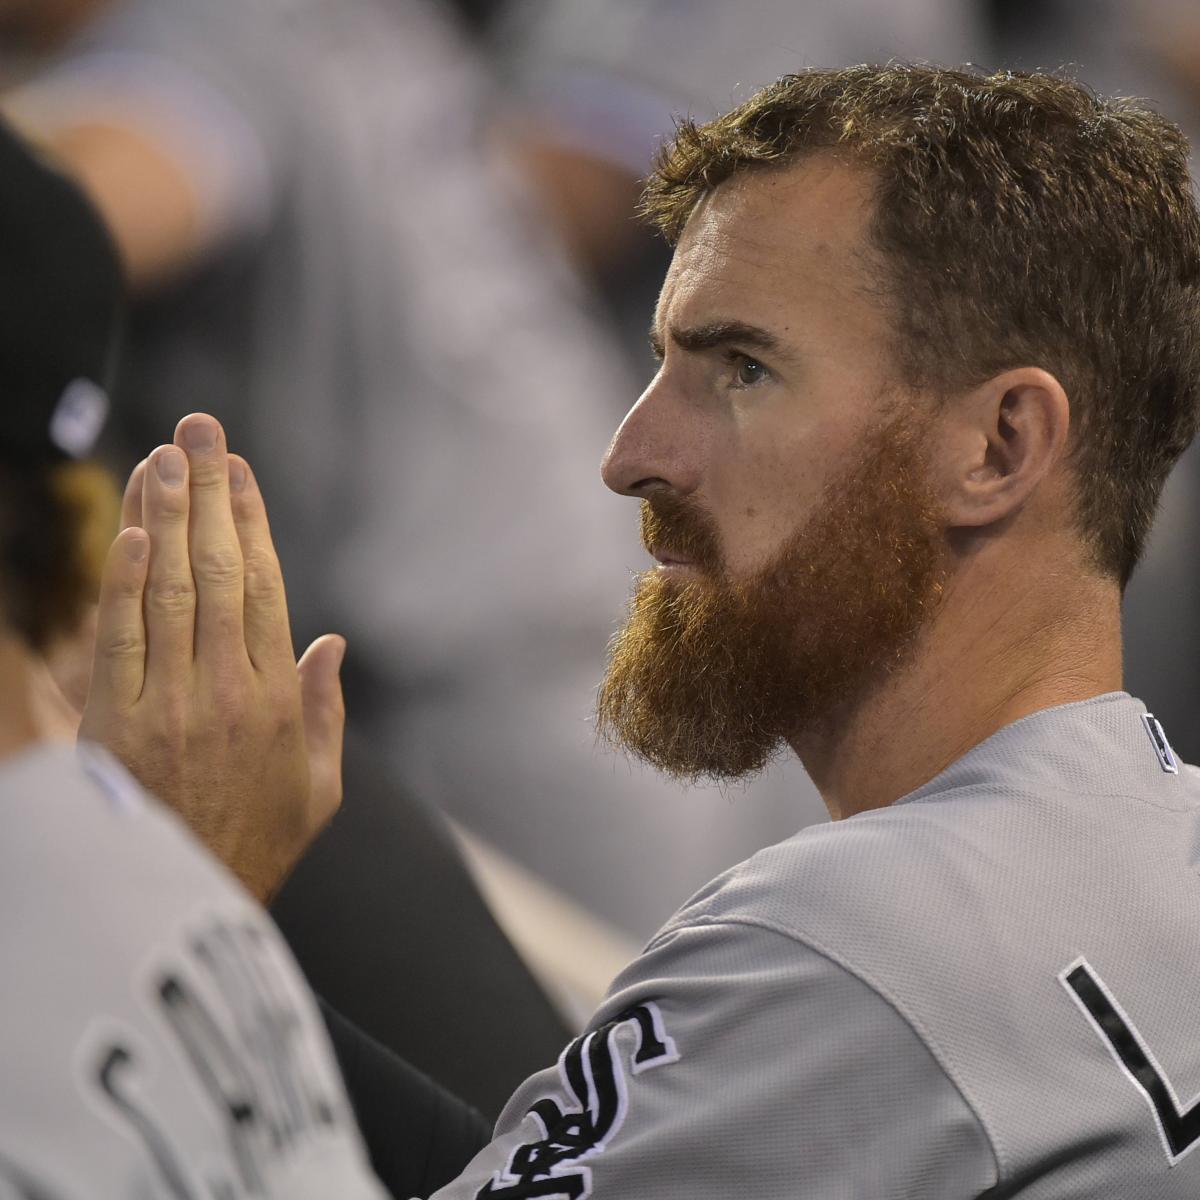 ESPN - Chris Sale showed his support for Adam LaRoche and his son in the  Chicago White Sox locker room.